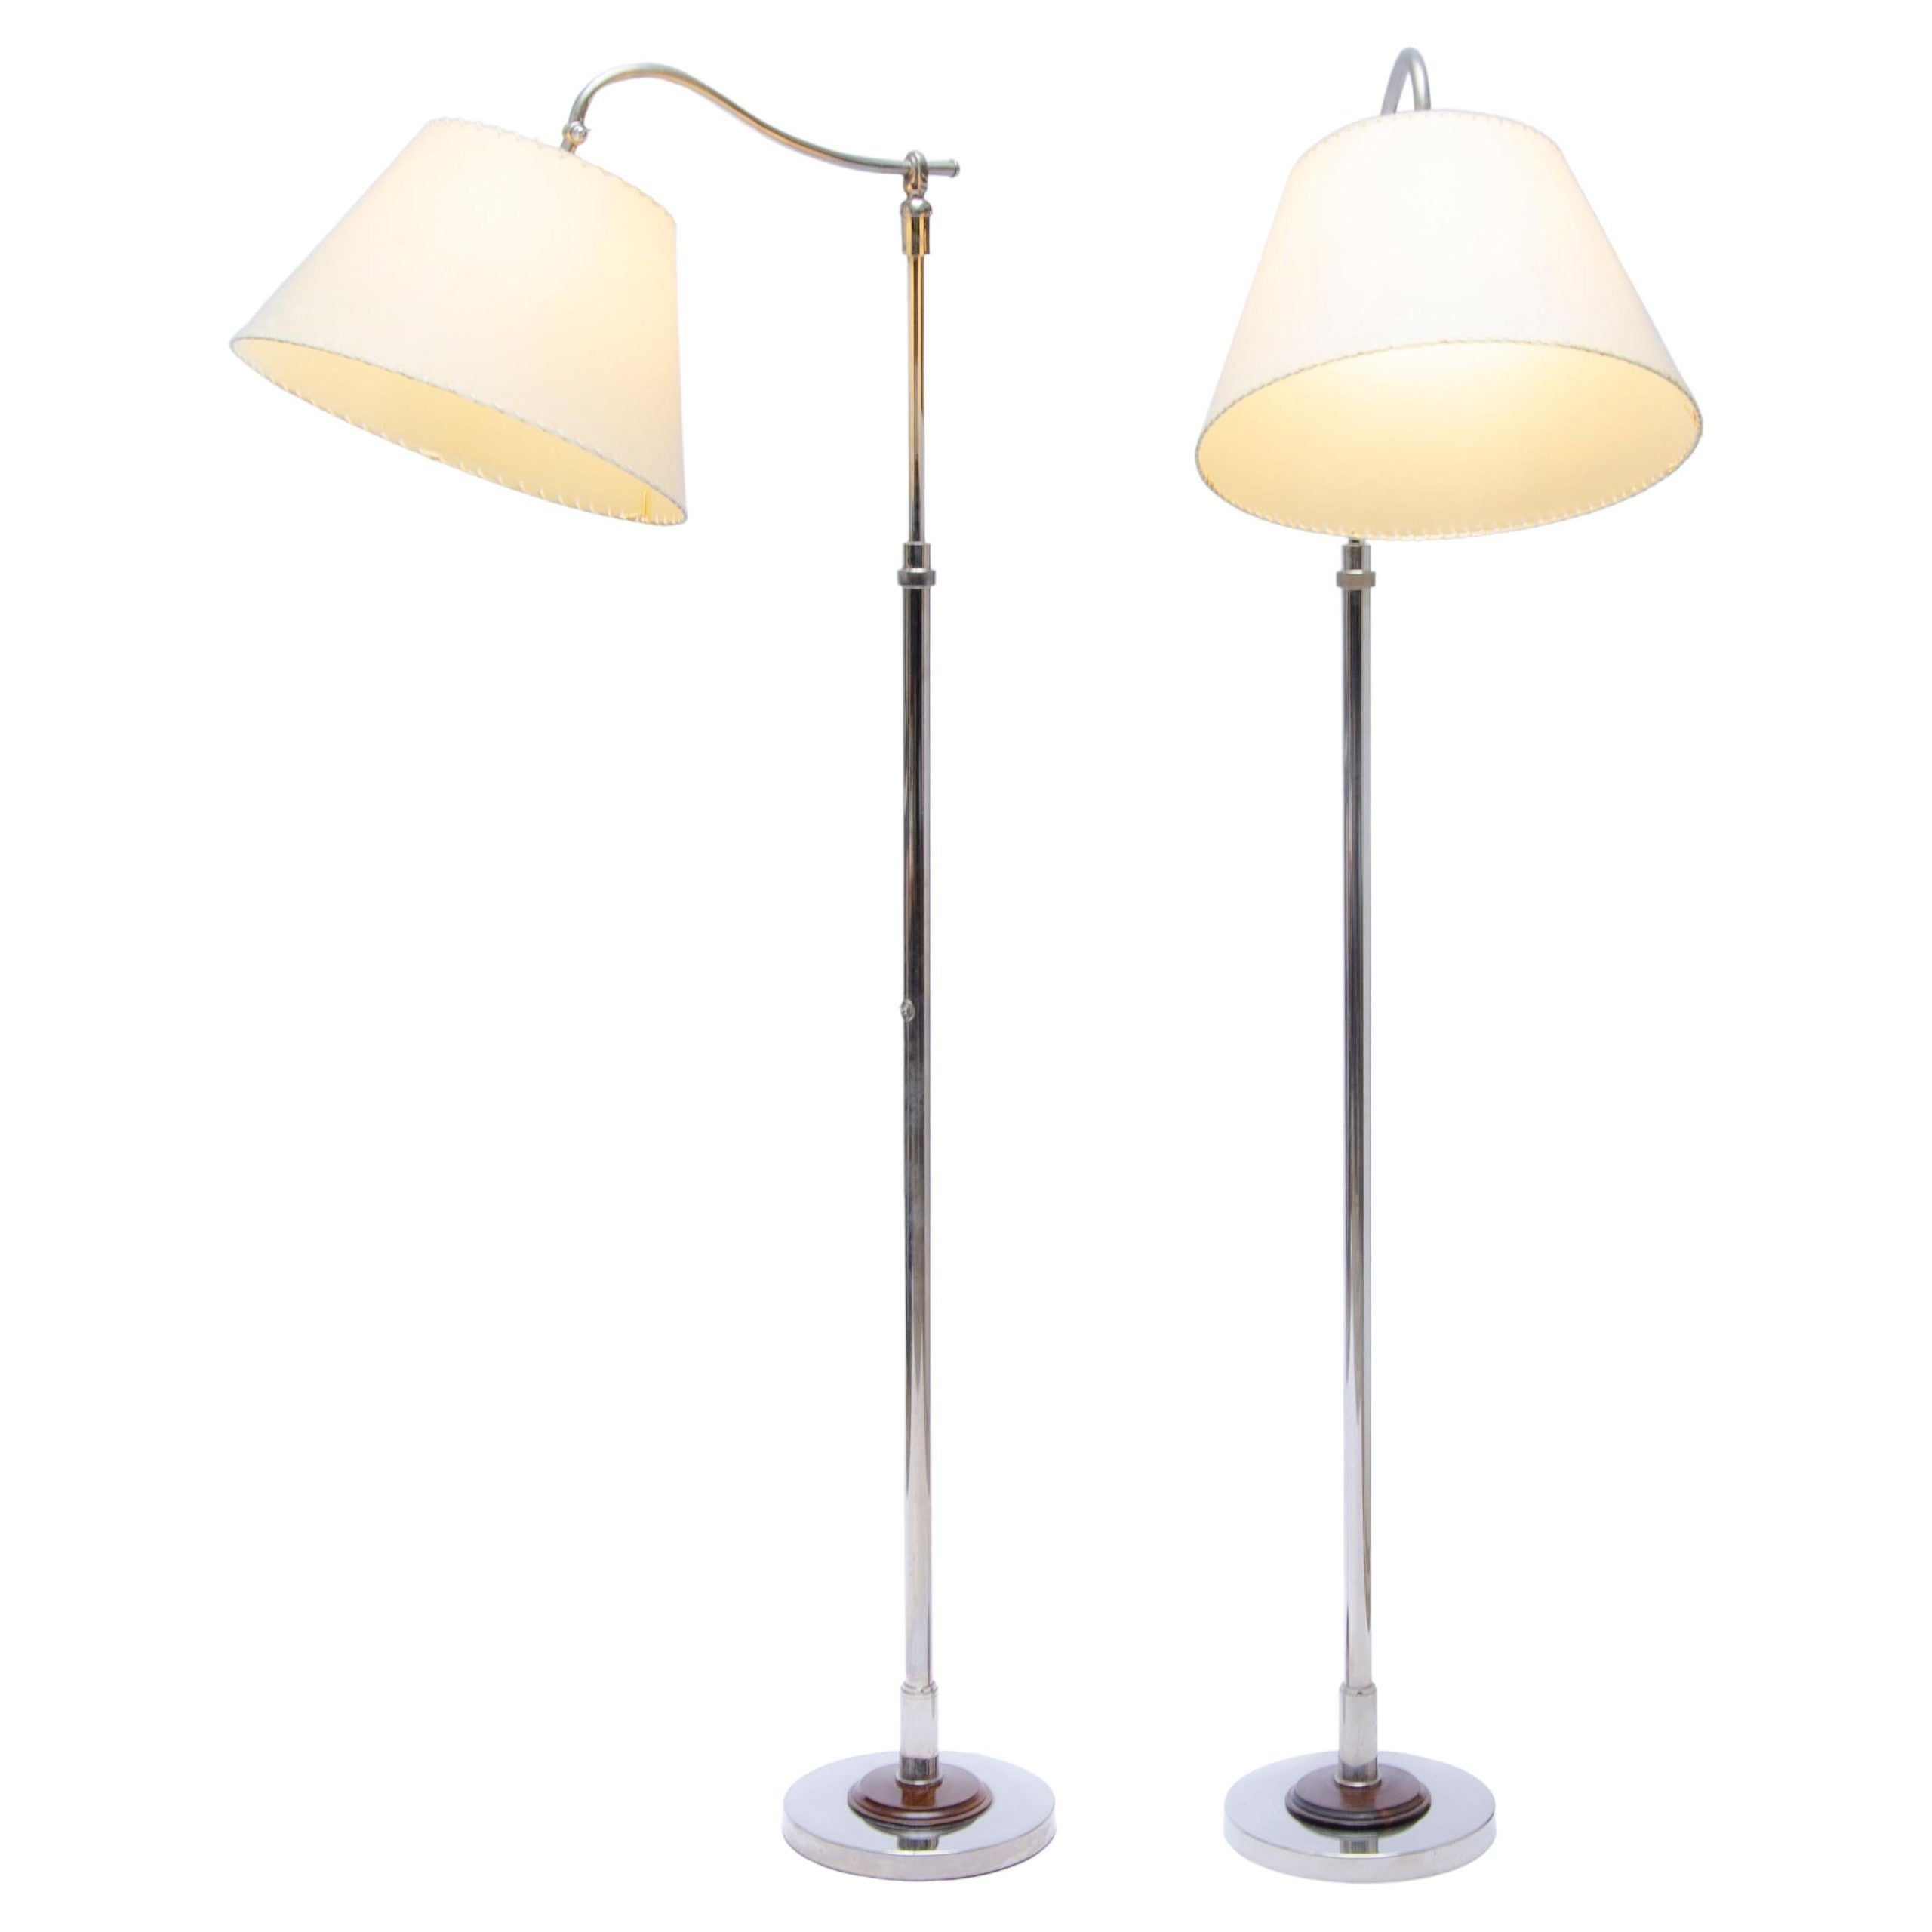 Pair Of Standing Lamps With Adjustable Heightcomte For Sale At 1stdibs In Adjustable Height Floor Lamps (View 6 of 15)